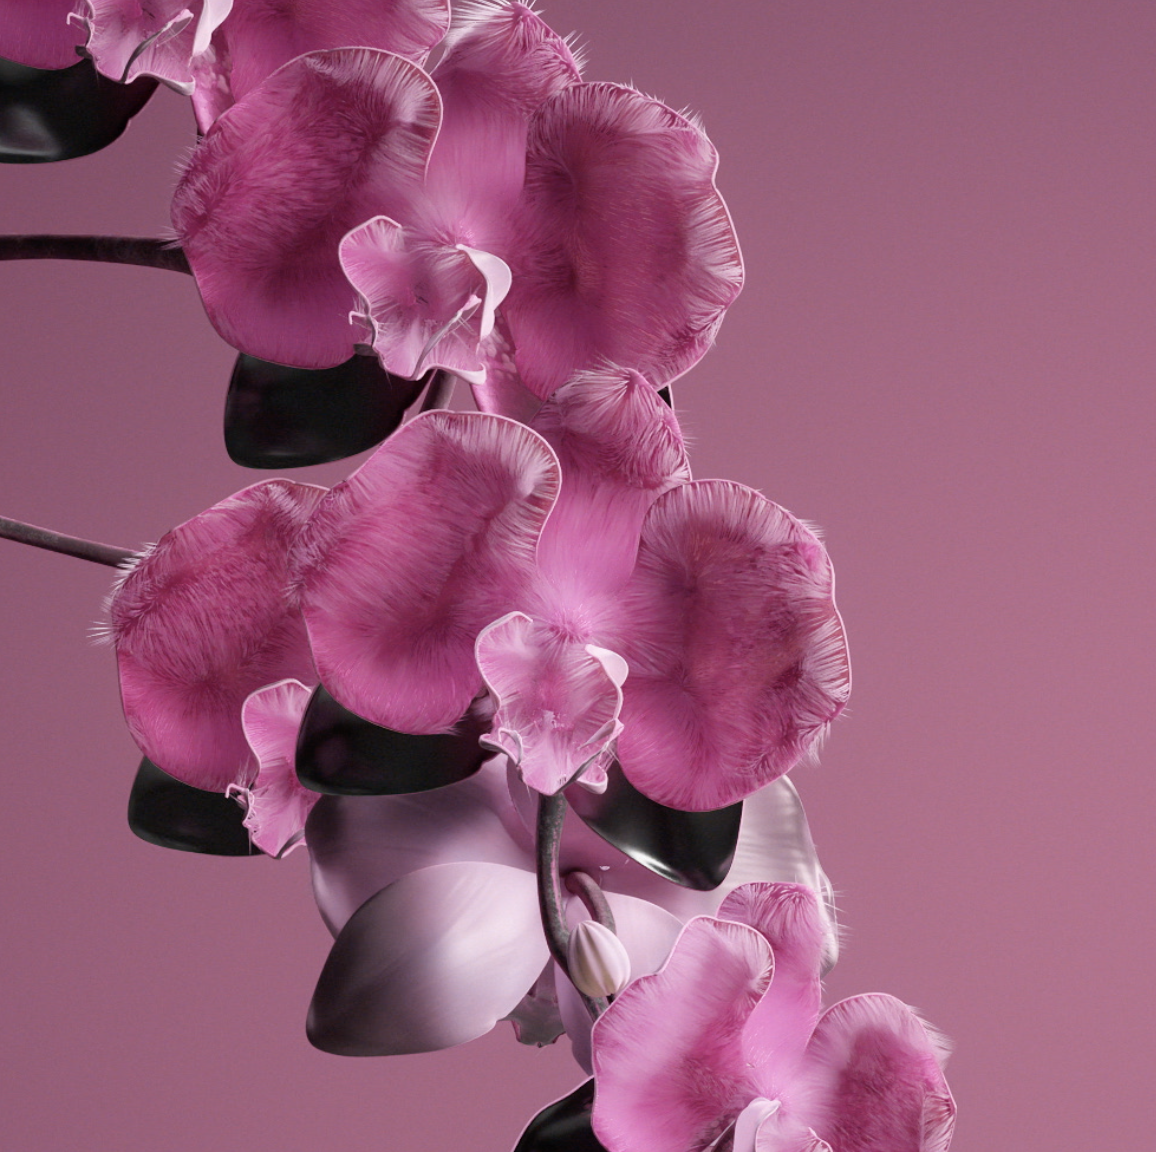 Orchid Flower, A Magenta Pink, Is WGSN's Colour Of The Year 2022